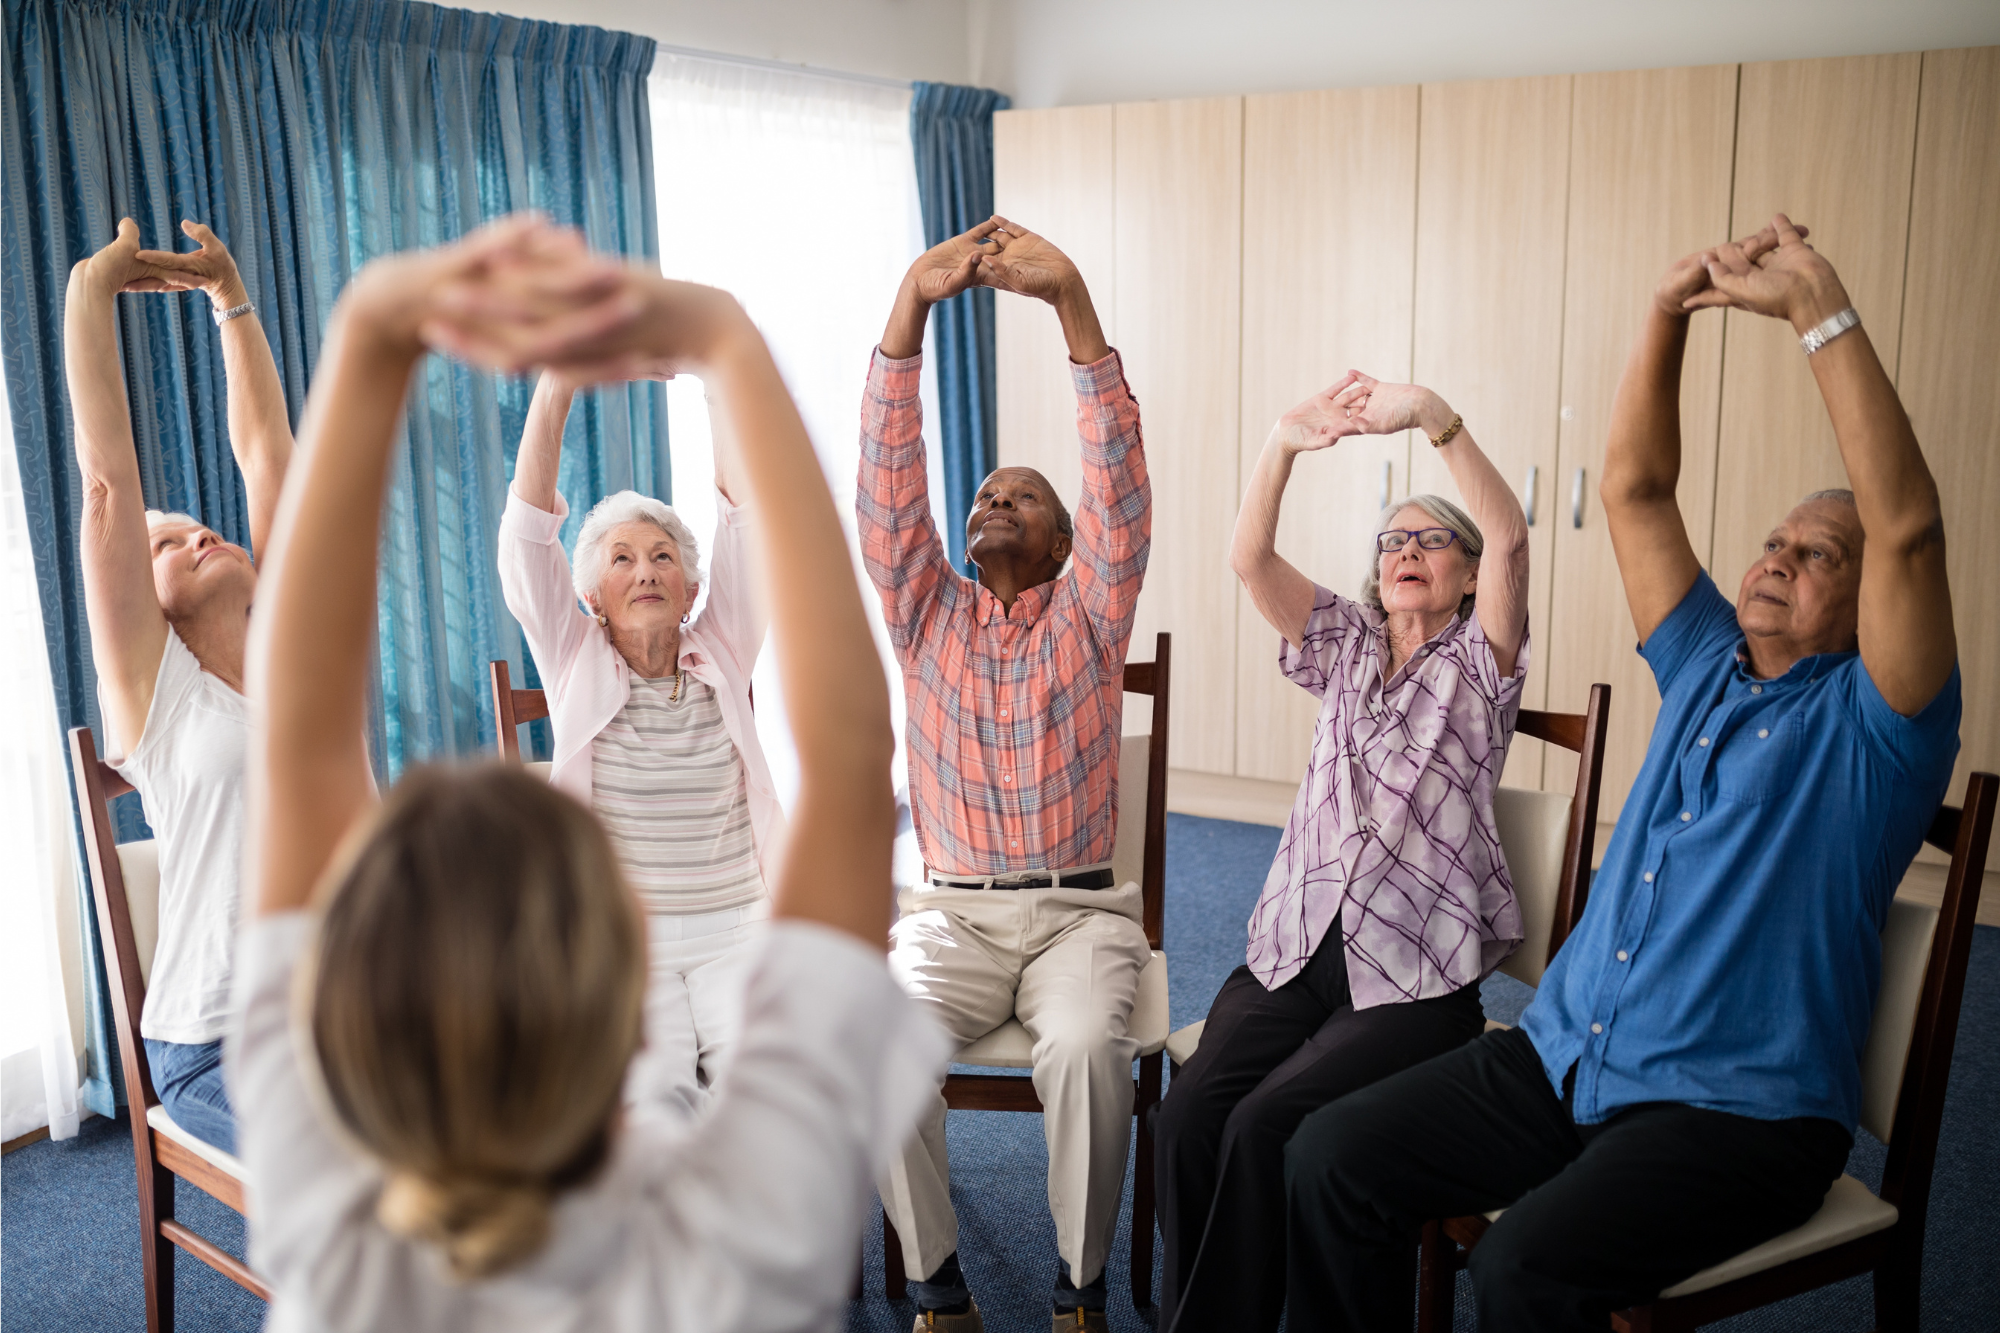 Chair Exercises for Seniors: 9 Easy Moves to Get Stronger